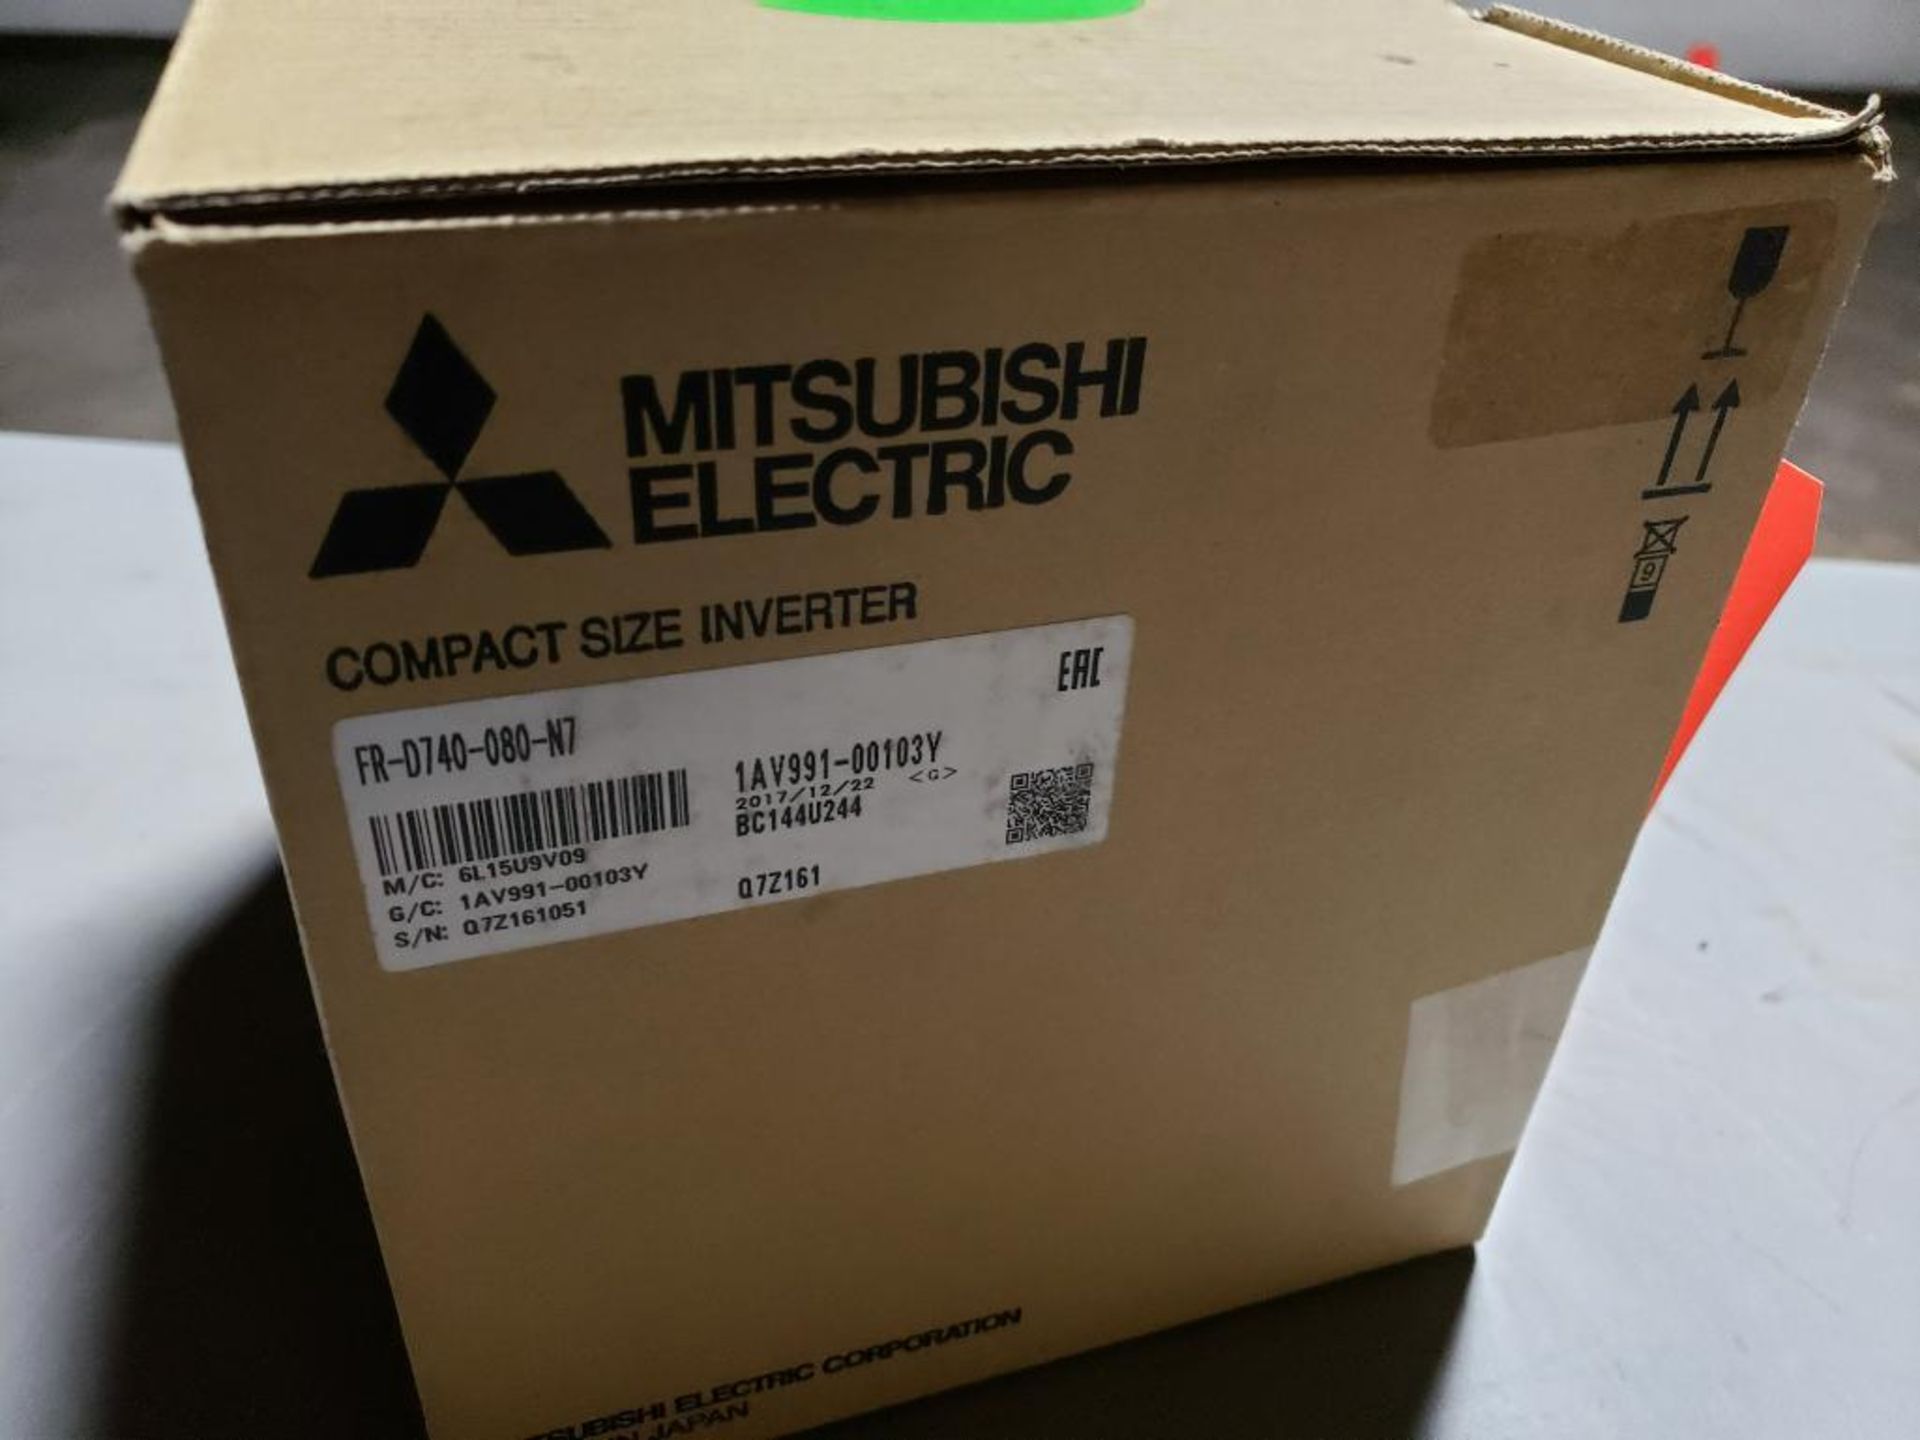 Mitsubishi inverter drive. Part number FR-D740-080-N7. New in box. - Image 6 of 6